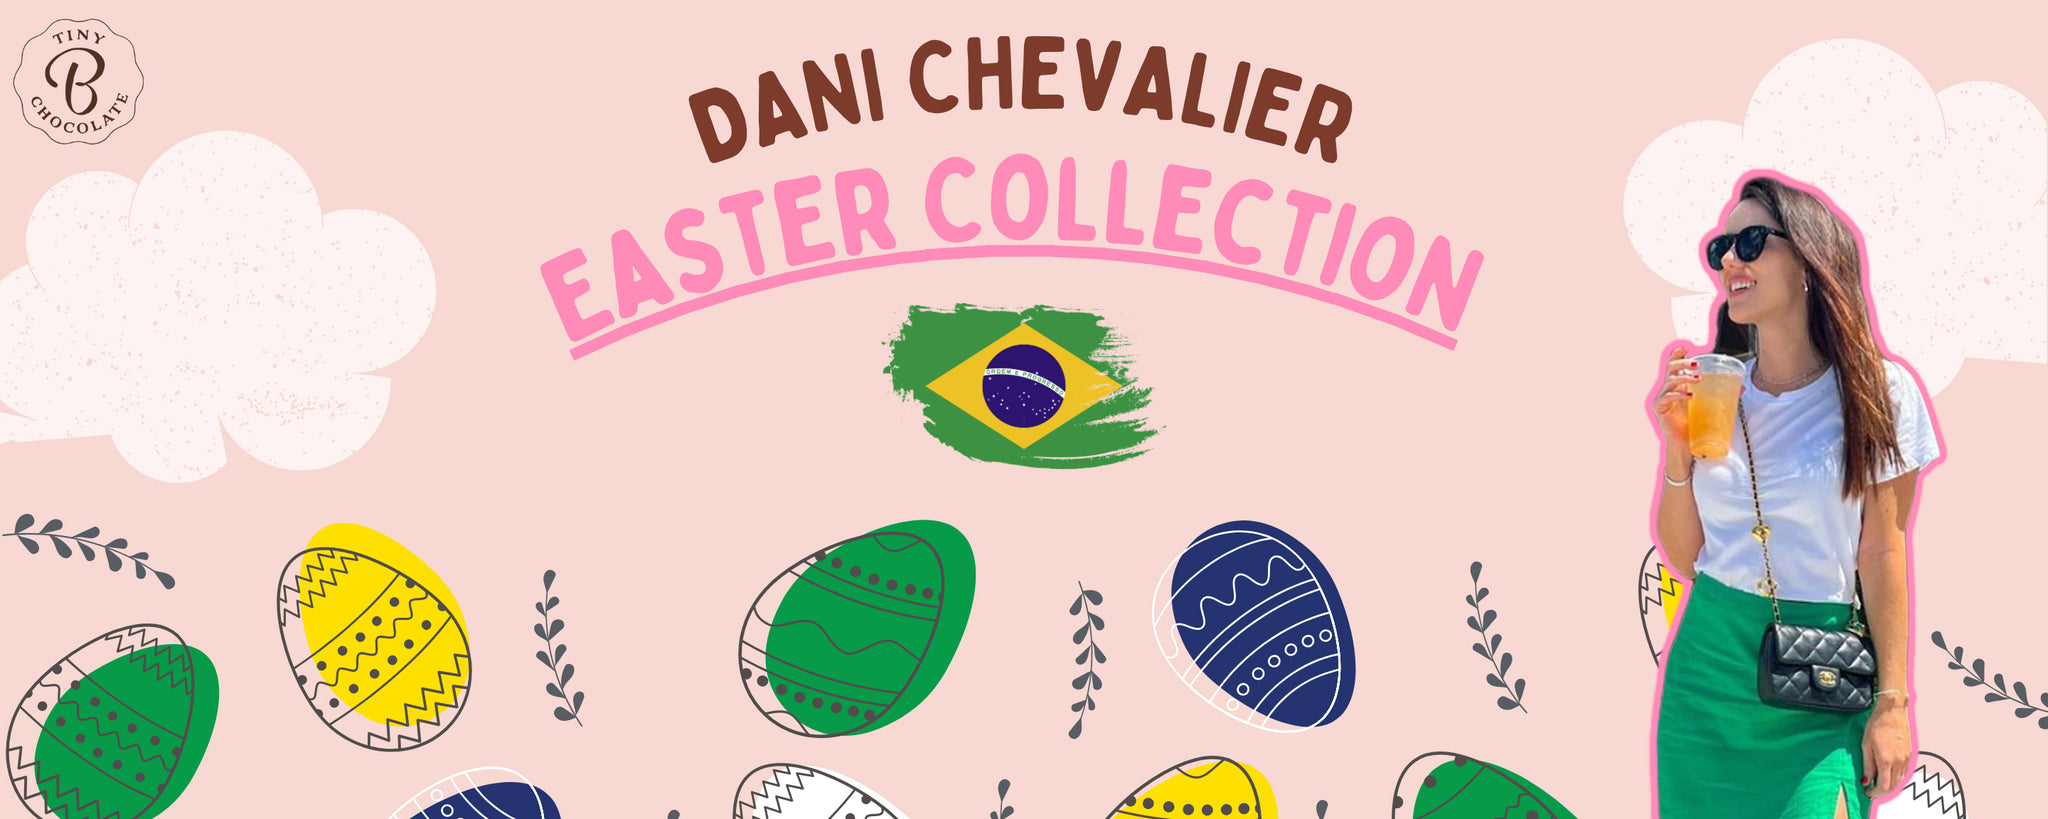 Dani Chevalier easter collection